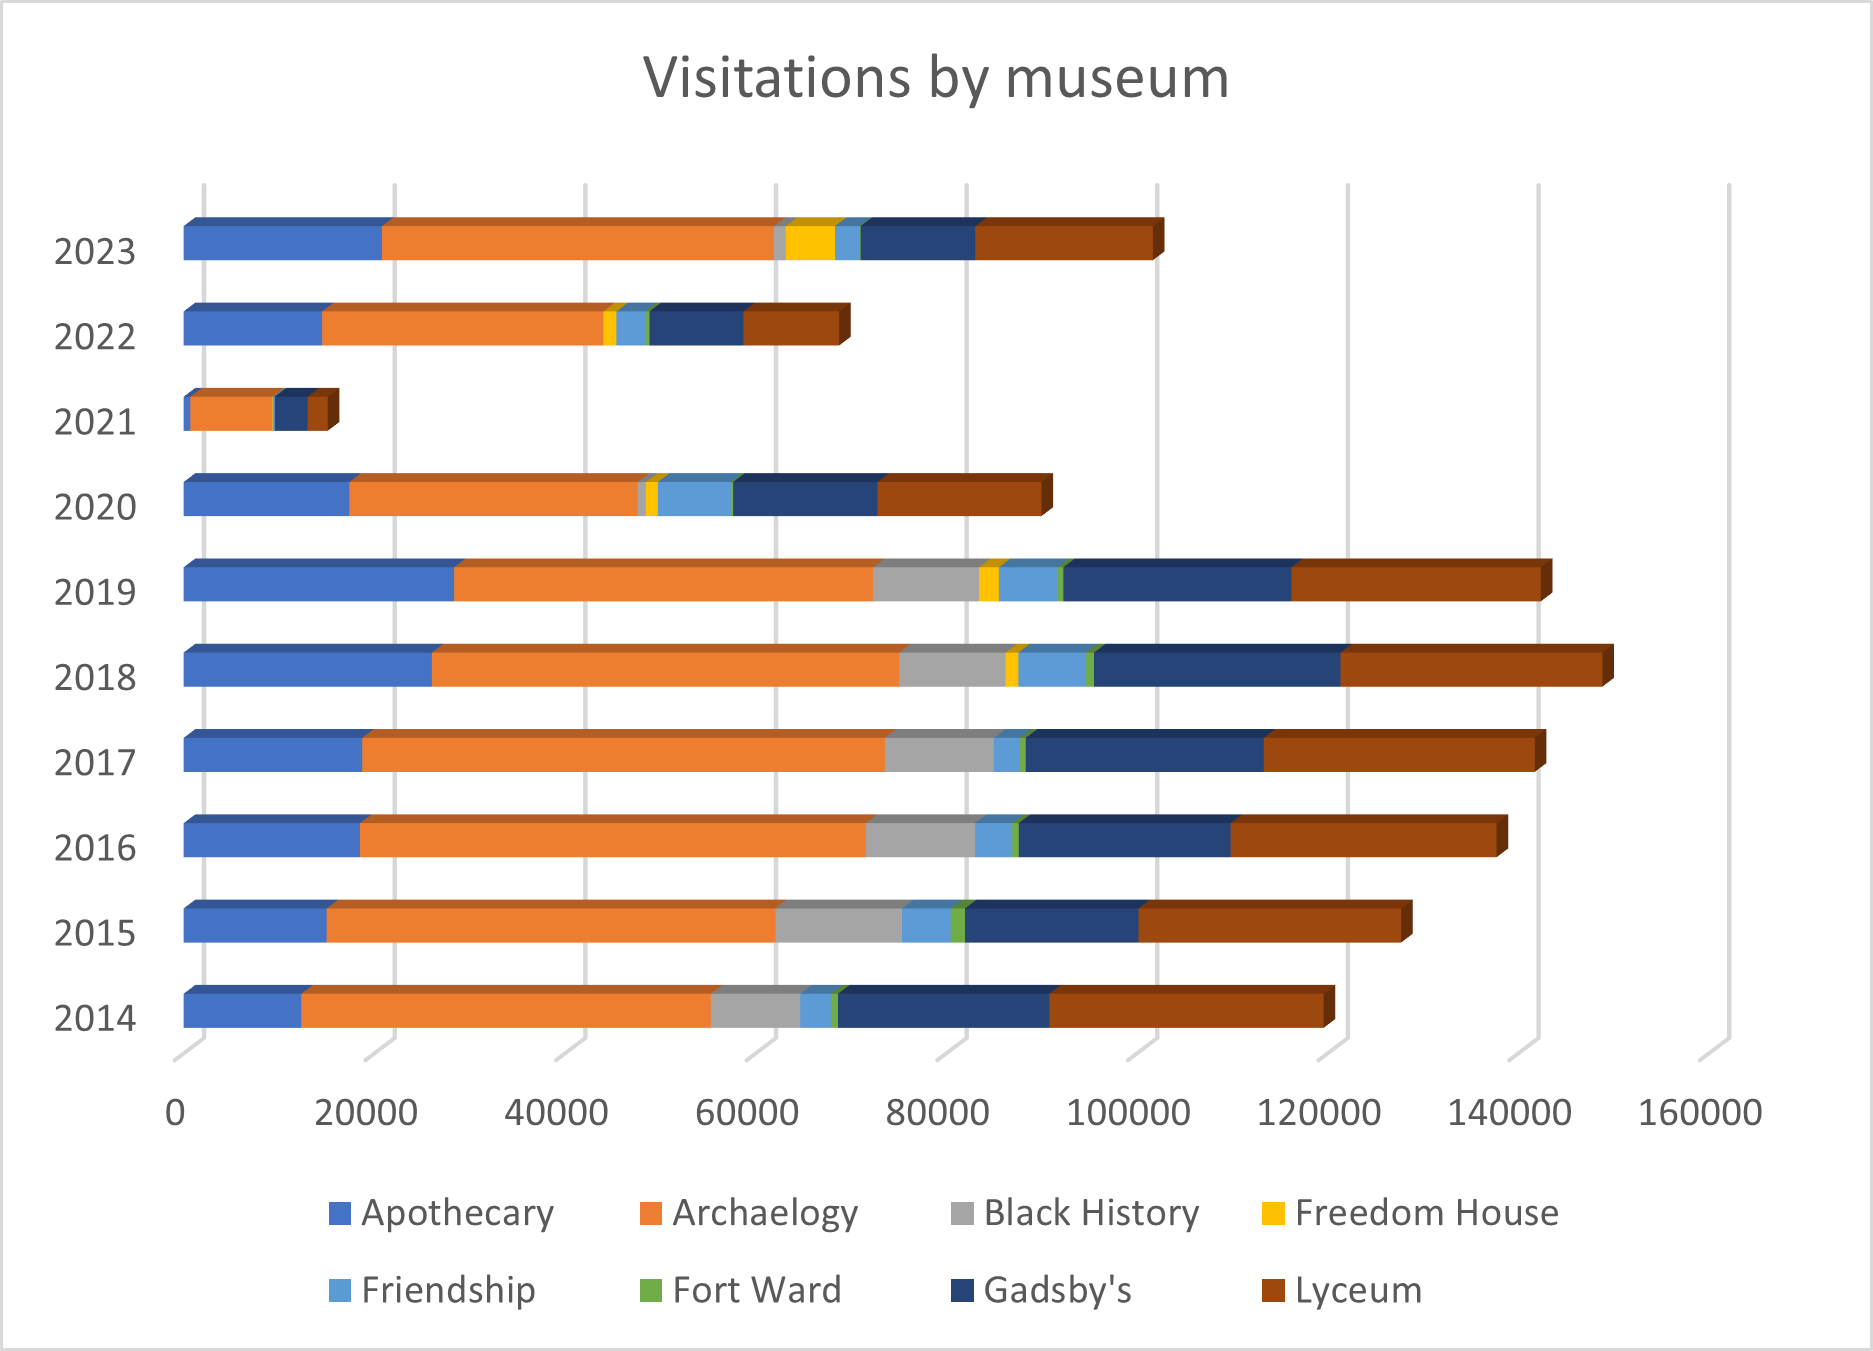 Bar graph showing visitation over the last 10 years with colors reflecting each museum